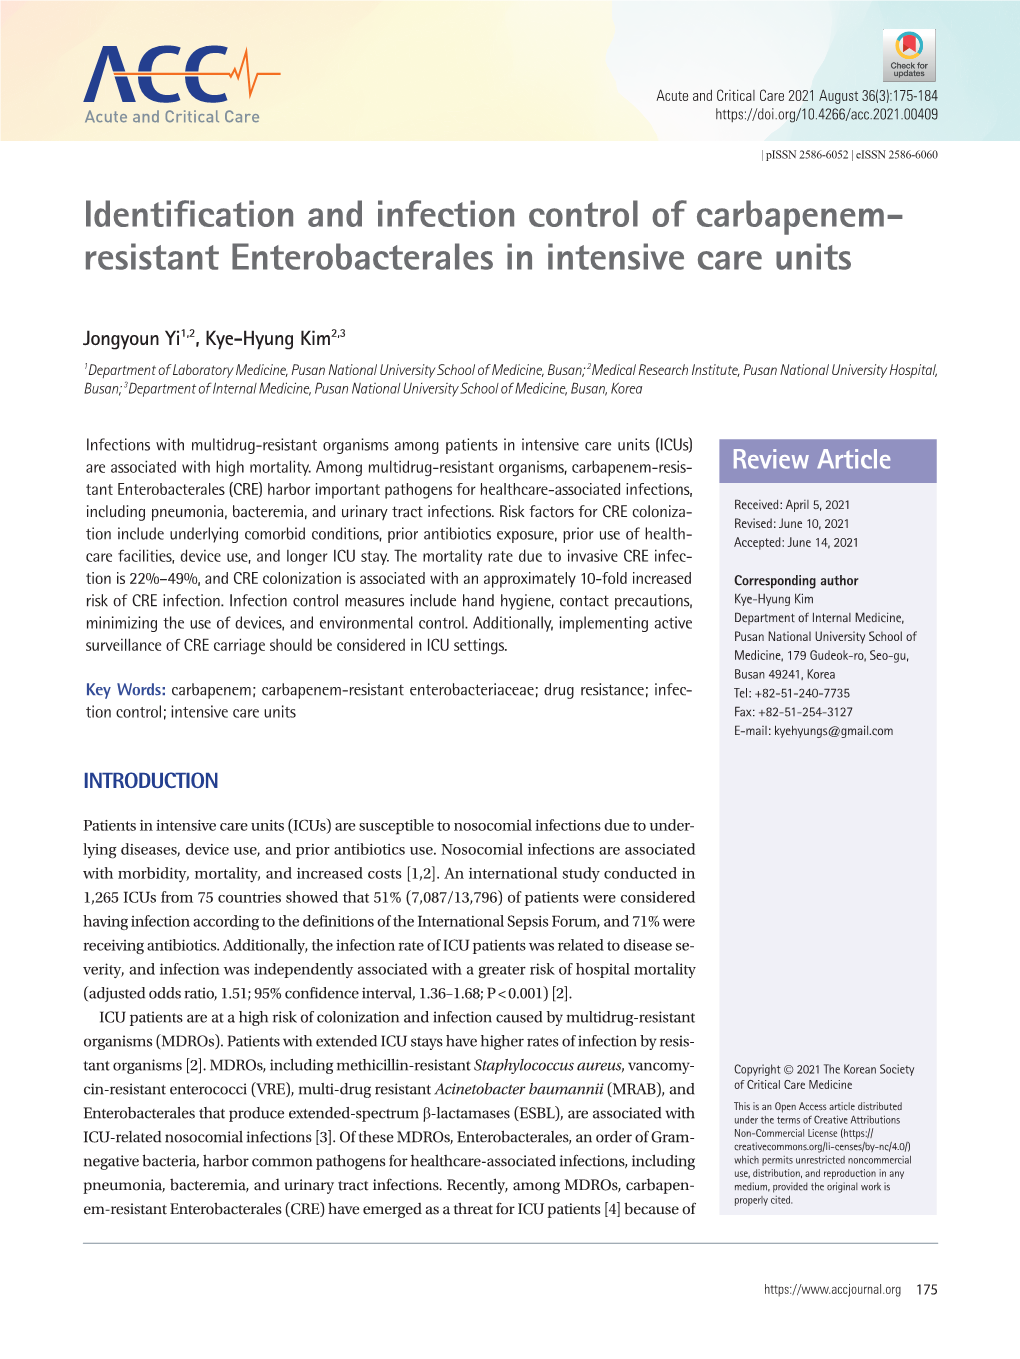 Identification and Infection Control of Carbapenem-Resistant Enterobacterales in Intensive Care Units